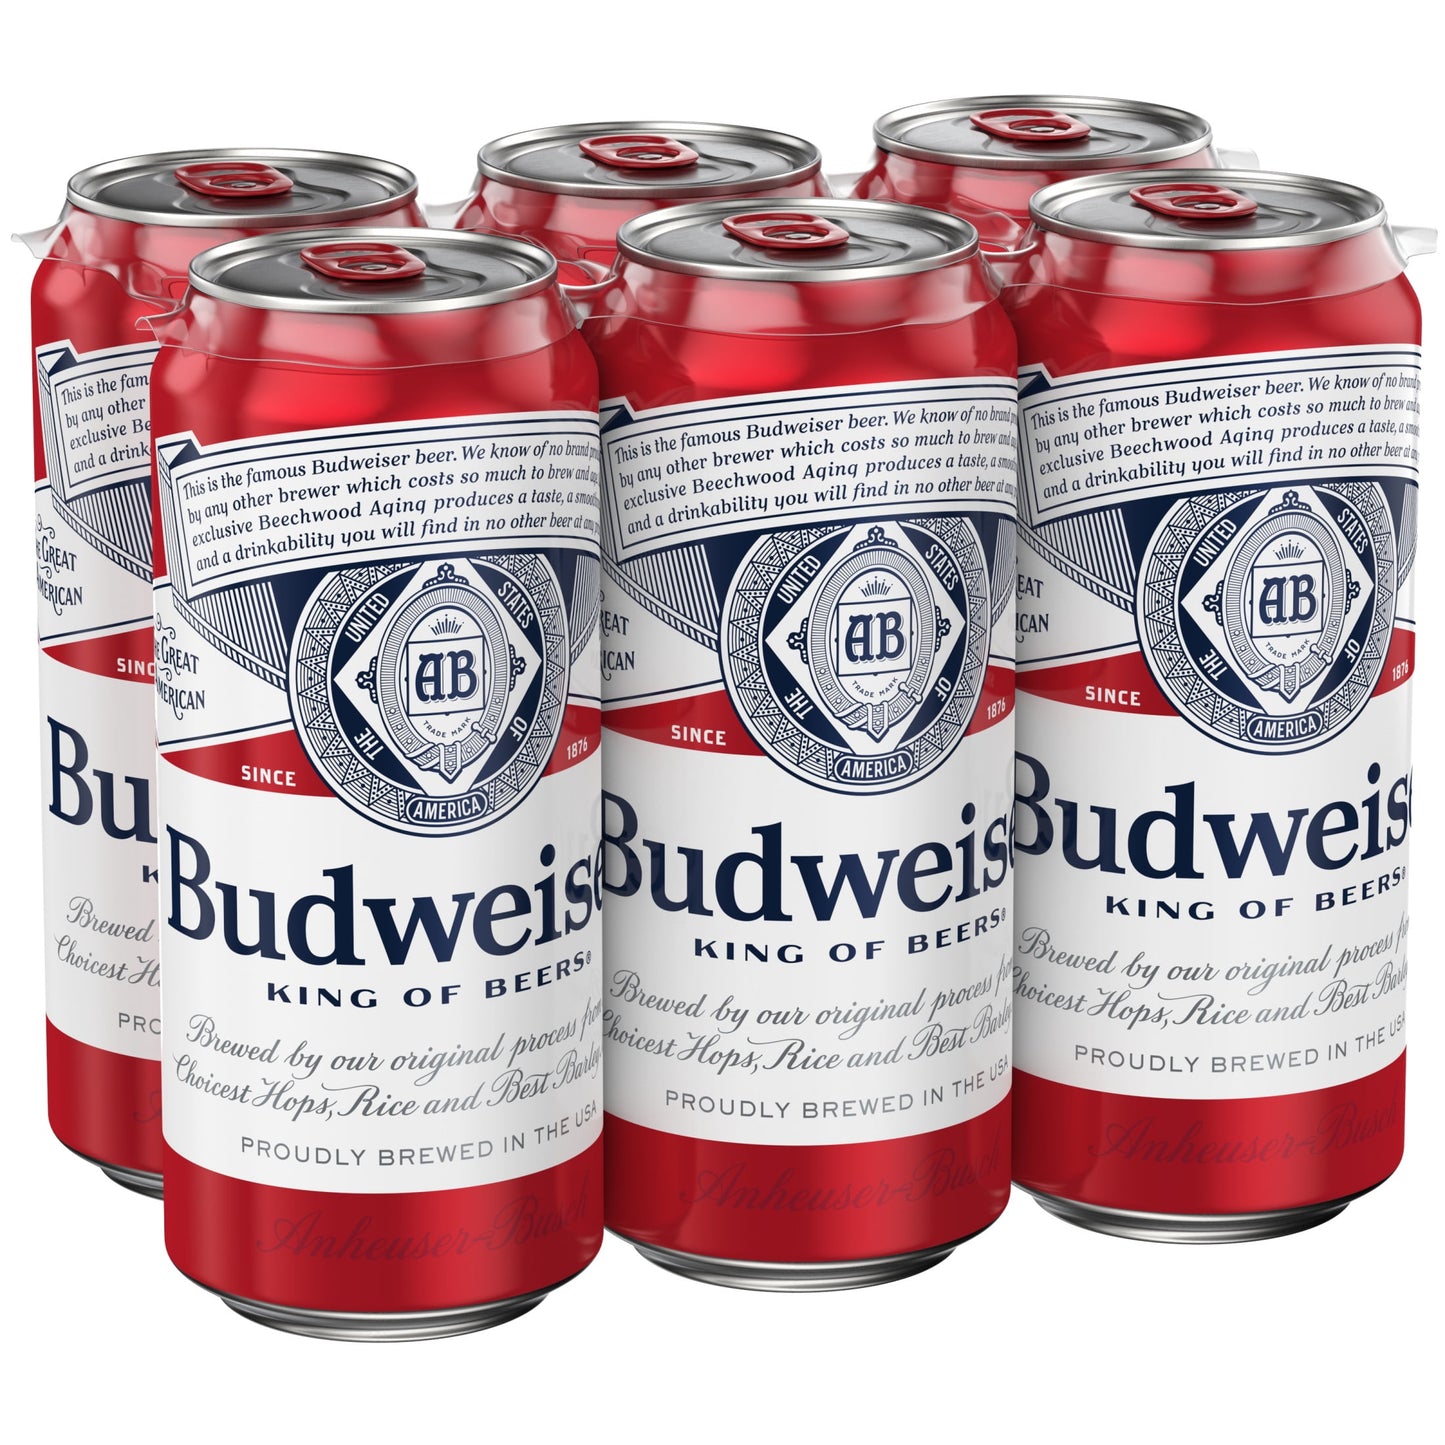 Budweiser American Lager Beer, 6 Pack, 16 fl oz Aluminum Cans, 5% ABV, Domestic